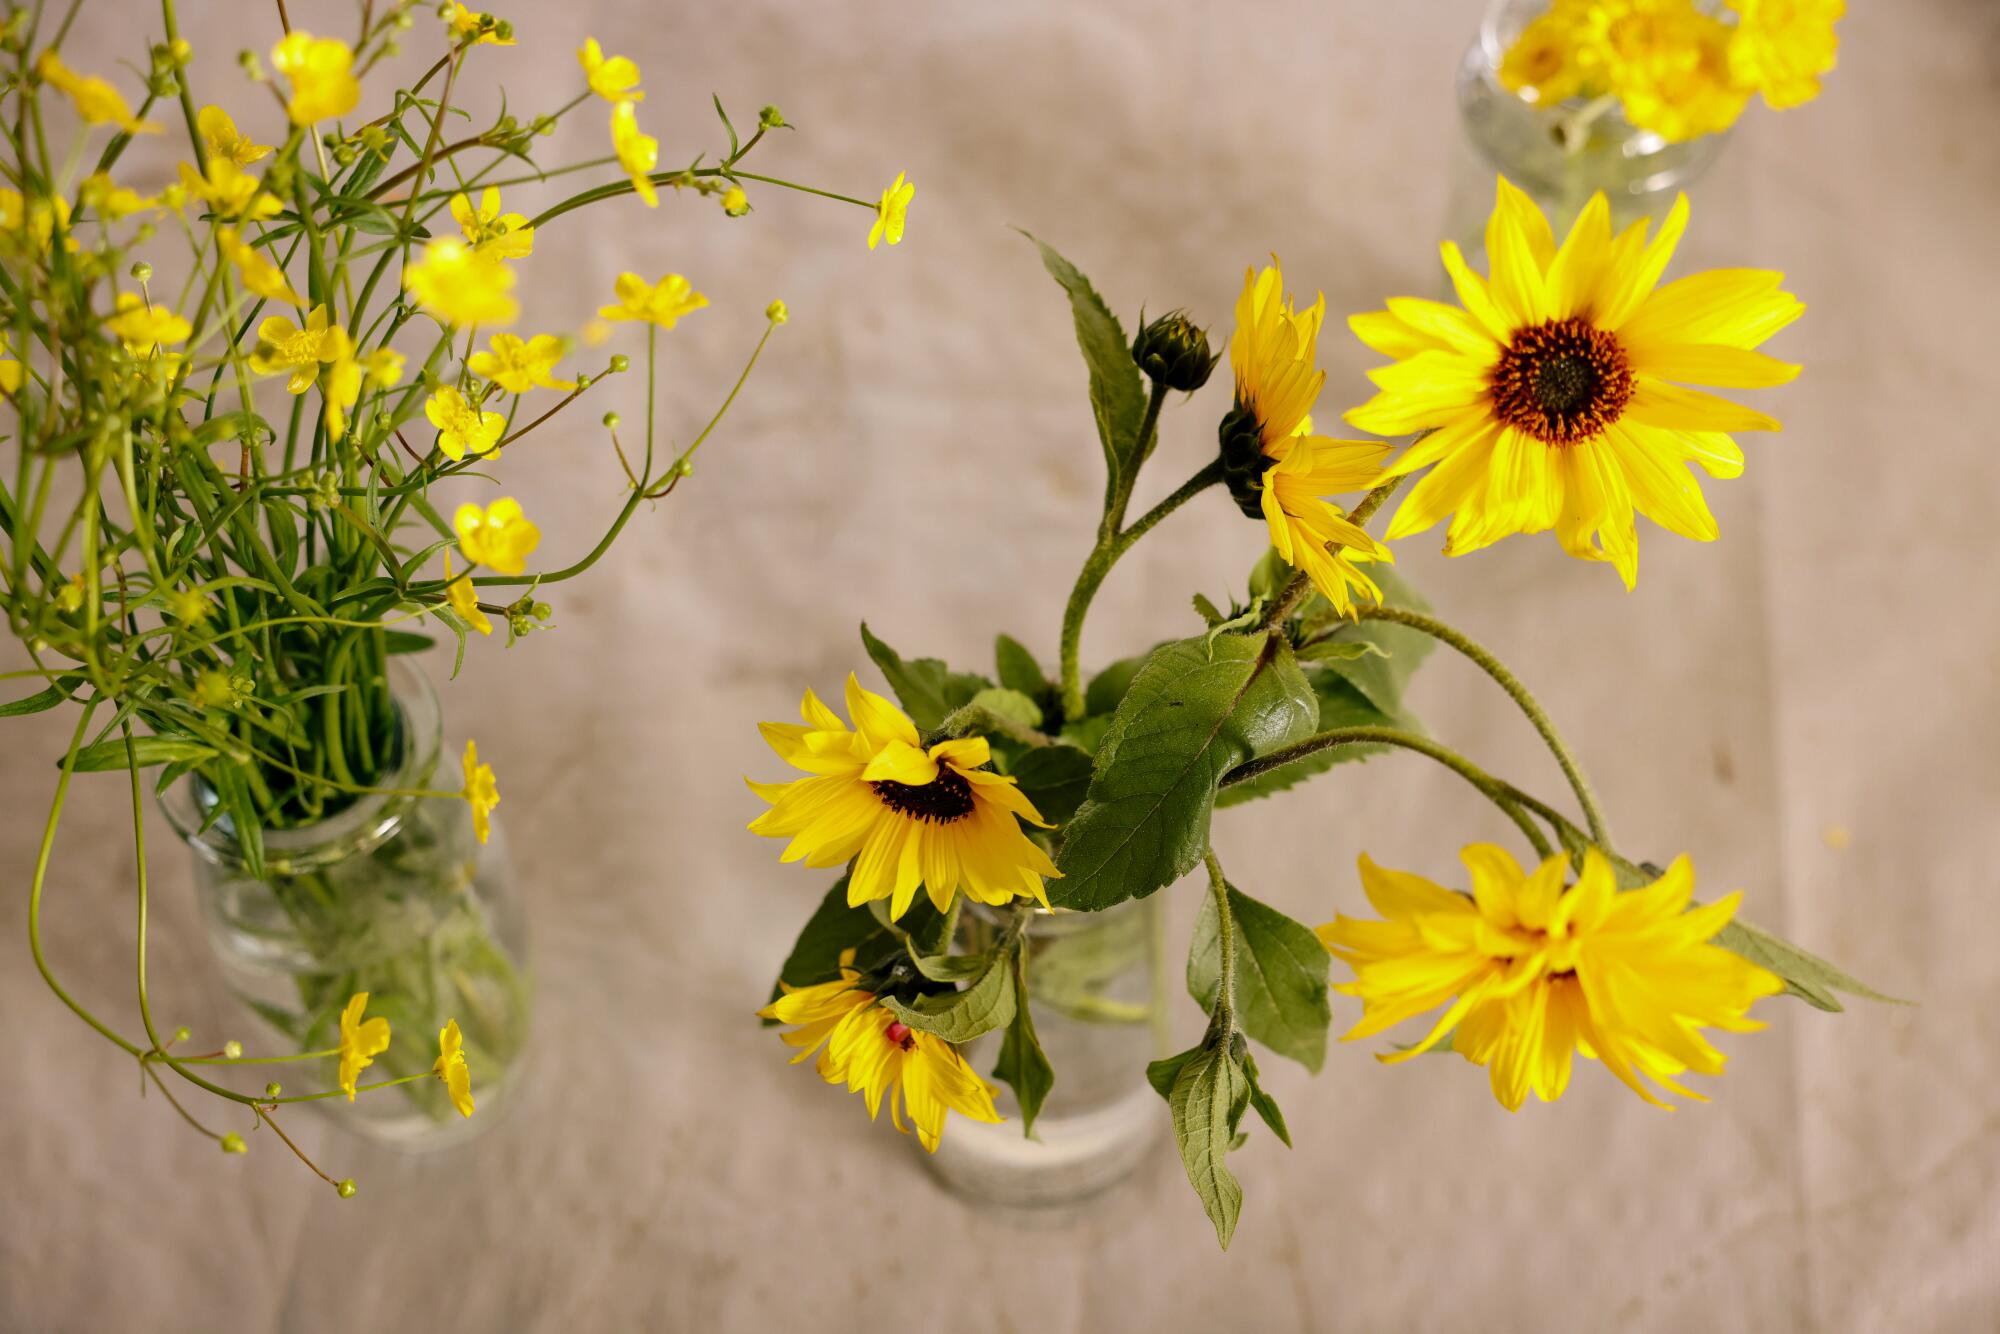 Bright yellow California buttercups and sunflowers hydrate in separate vases waiting to be arranged.